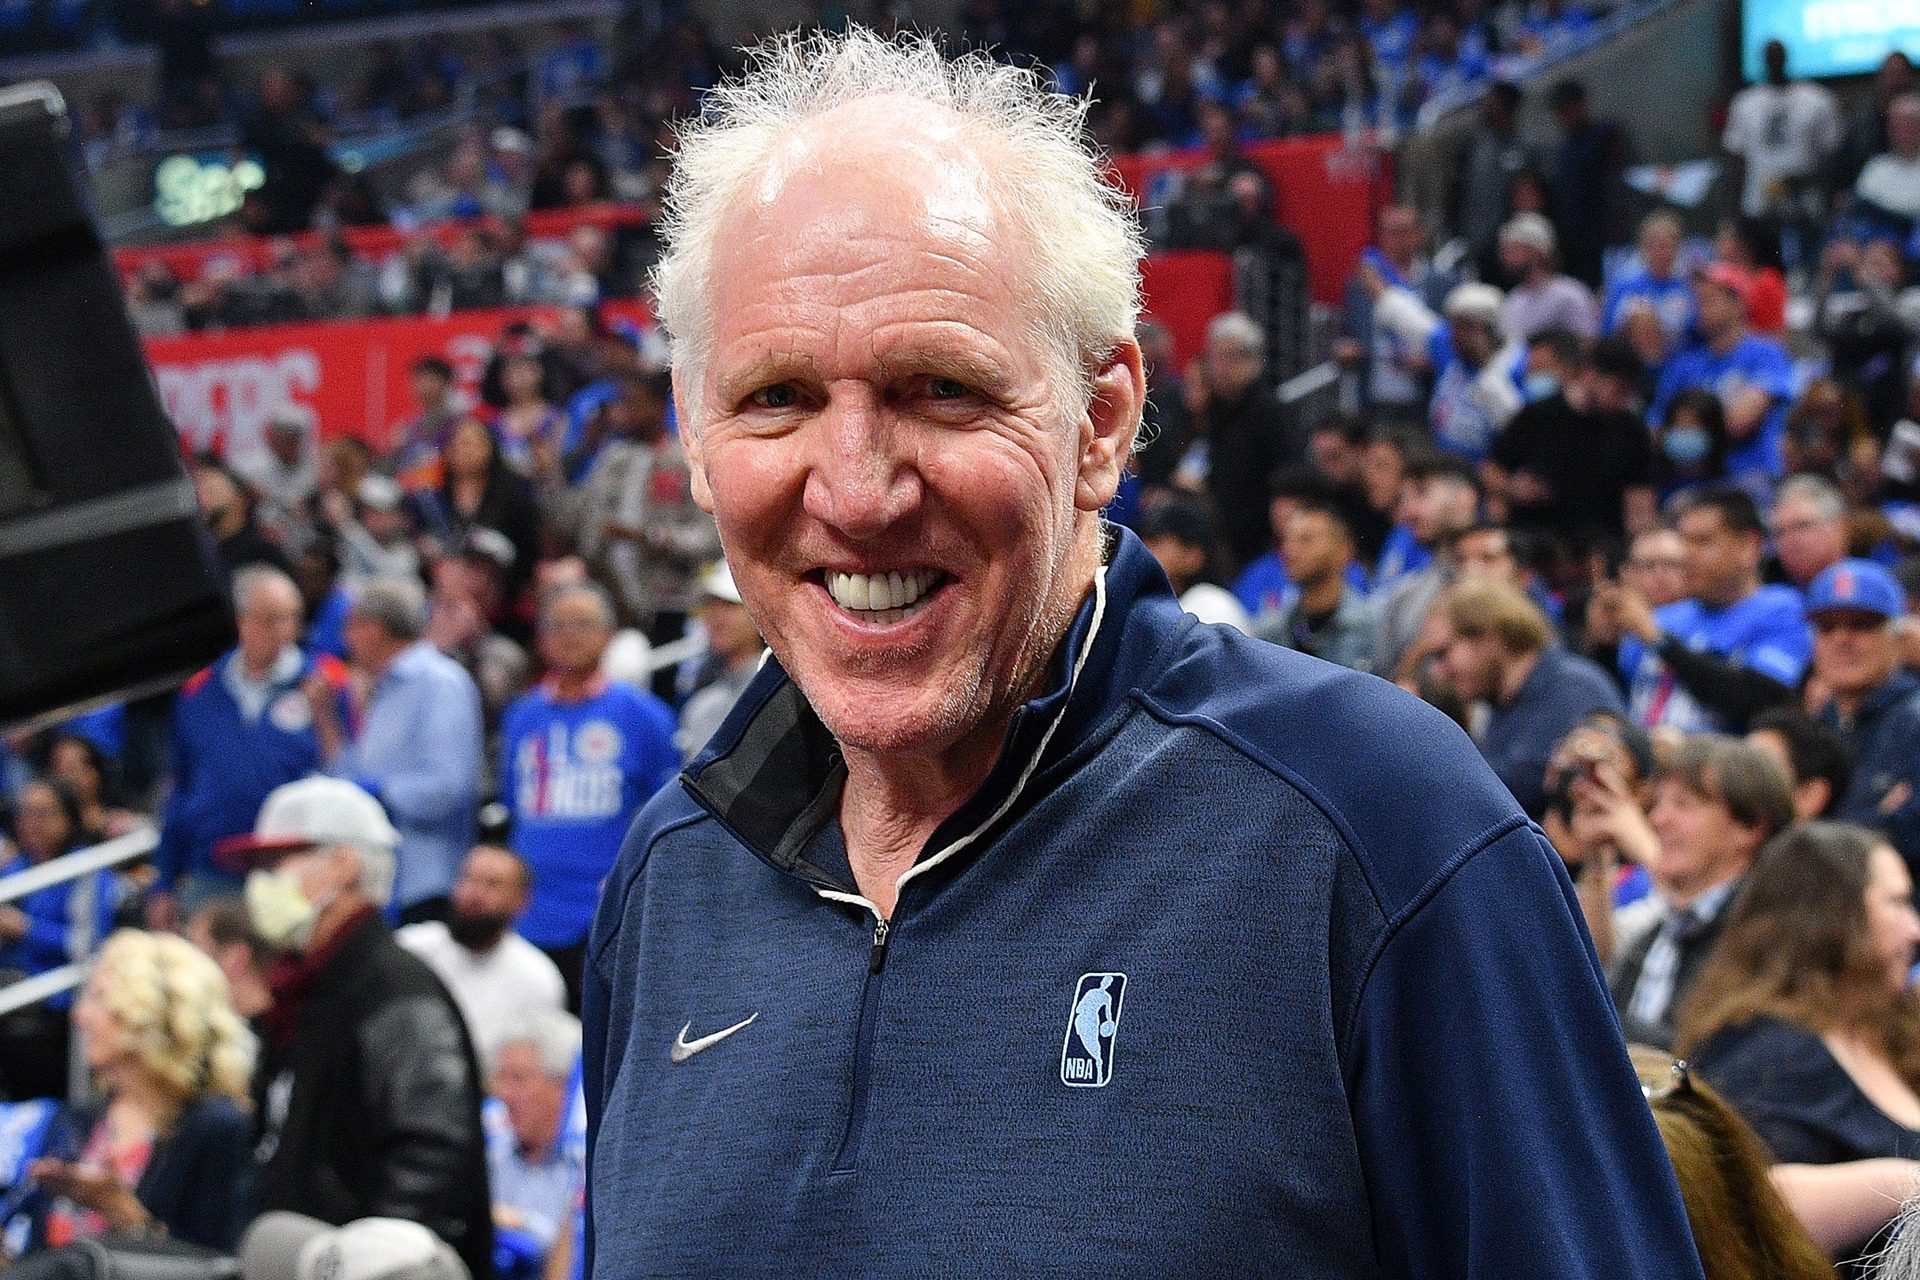 NBA legend Bill Walton dies at age 71 after battle with cancer